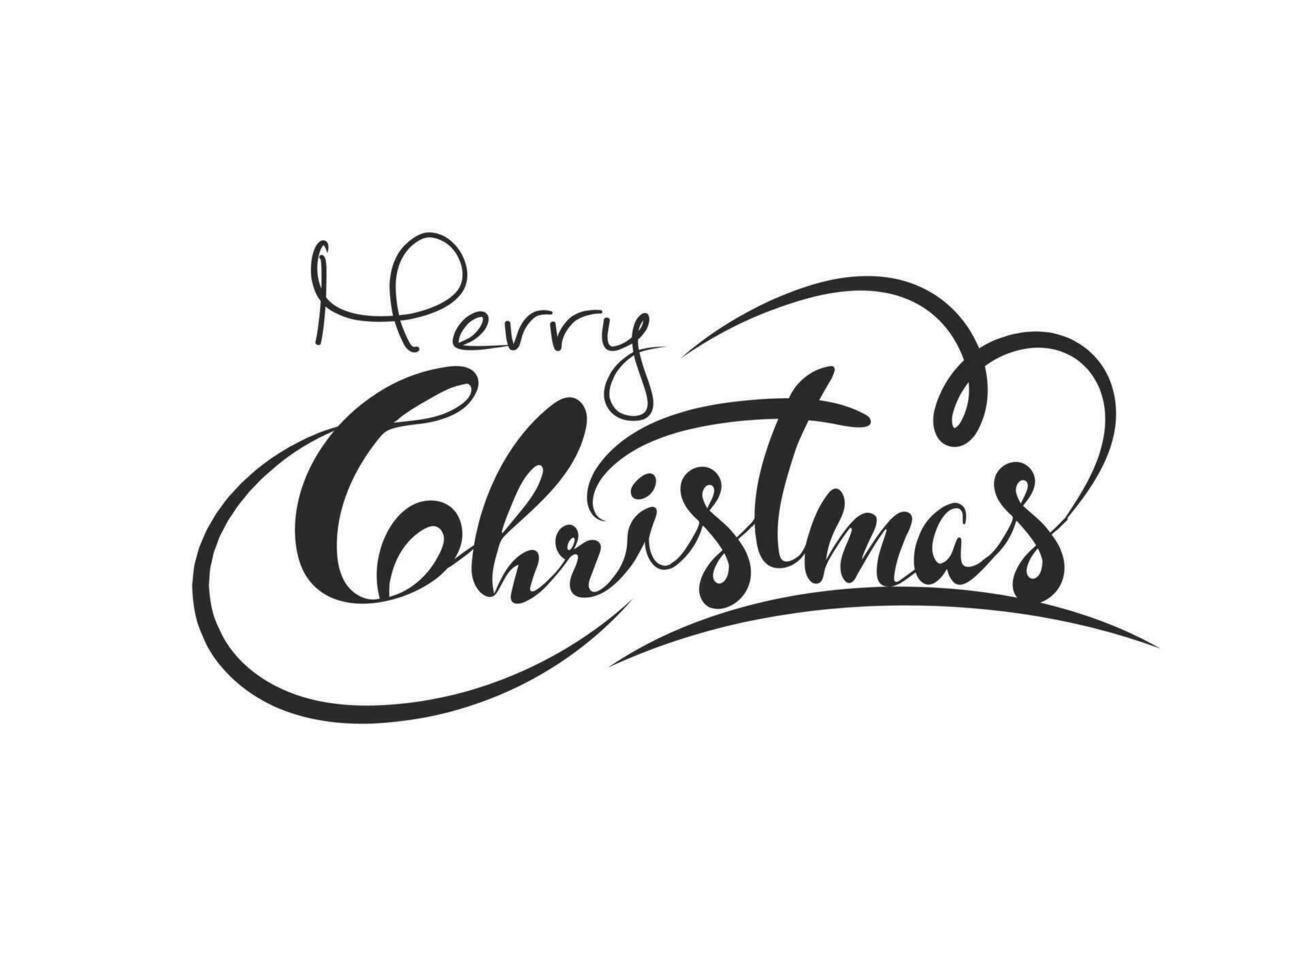 Black Calligraphy Merry Christmas Text on White Background. Can be used as greeting card design. vector